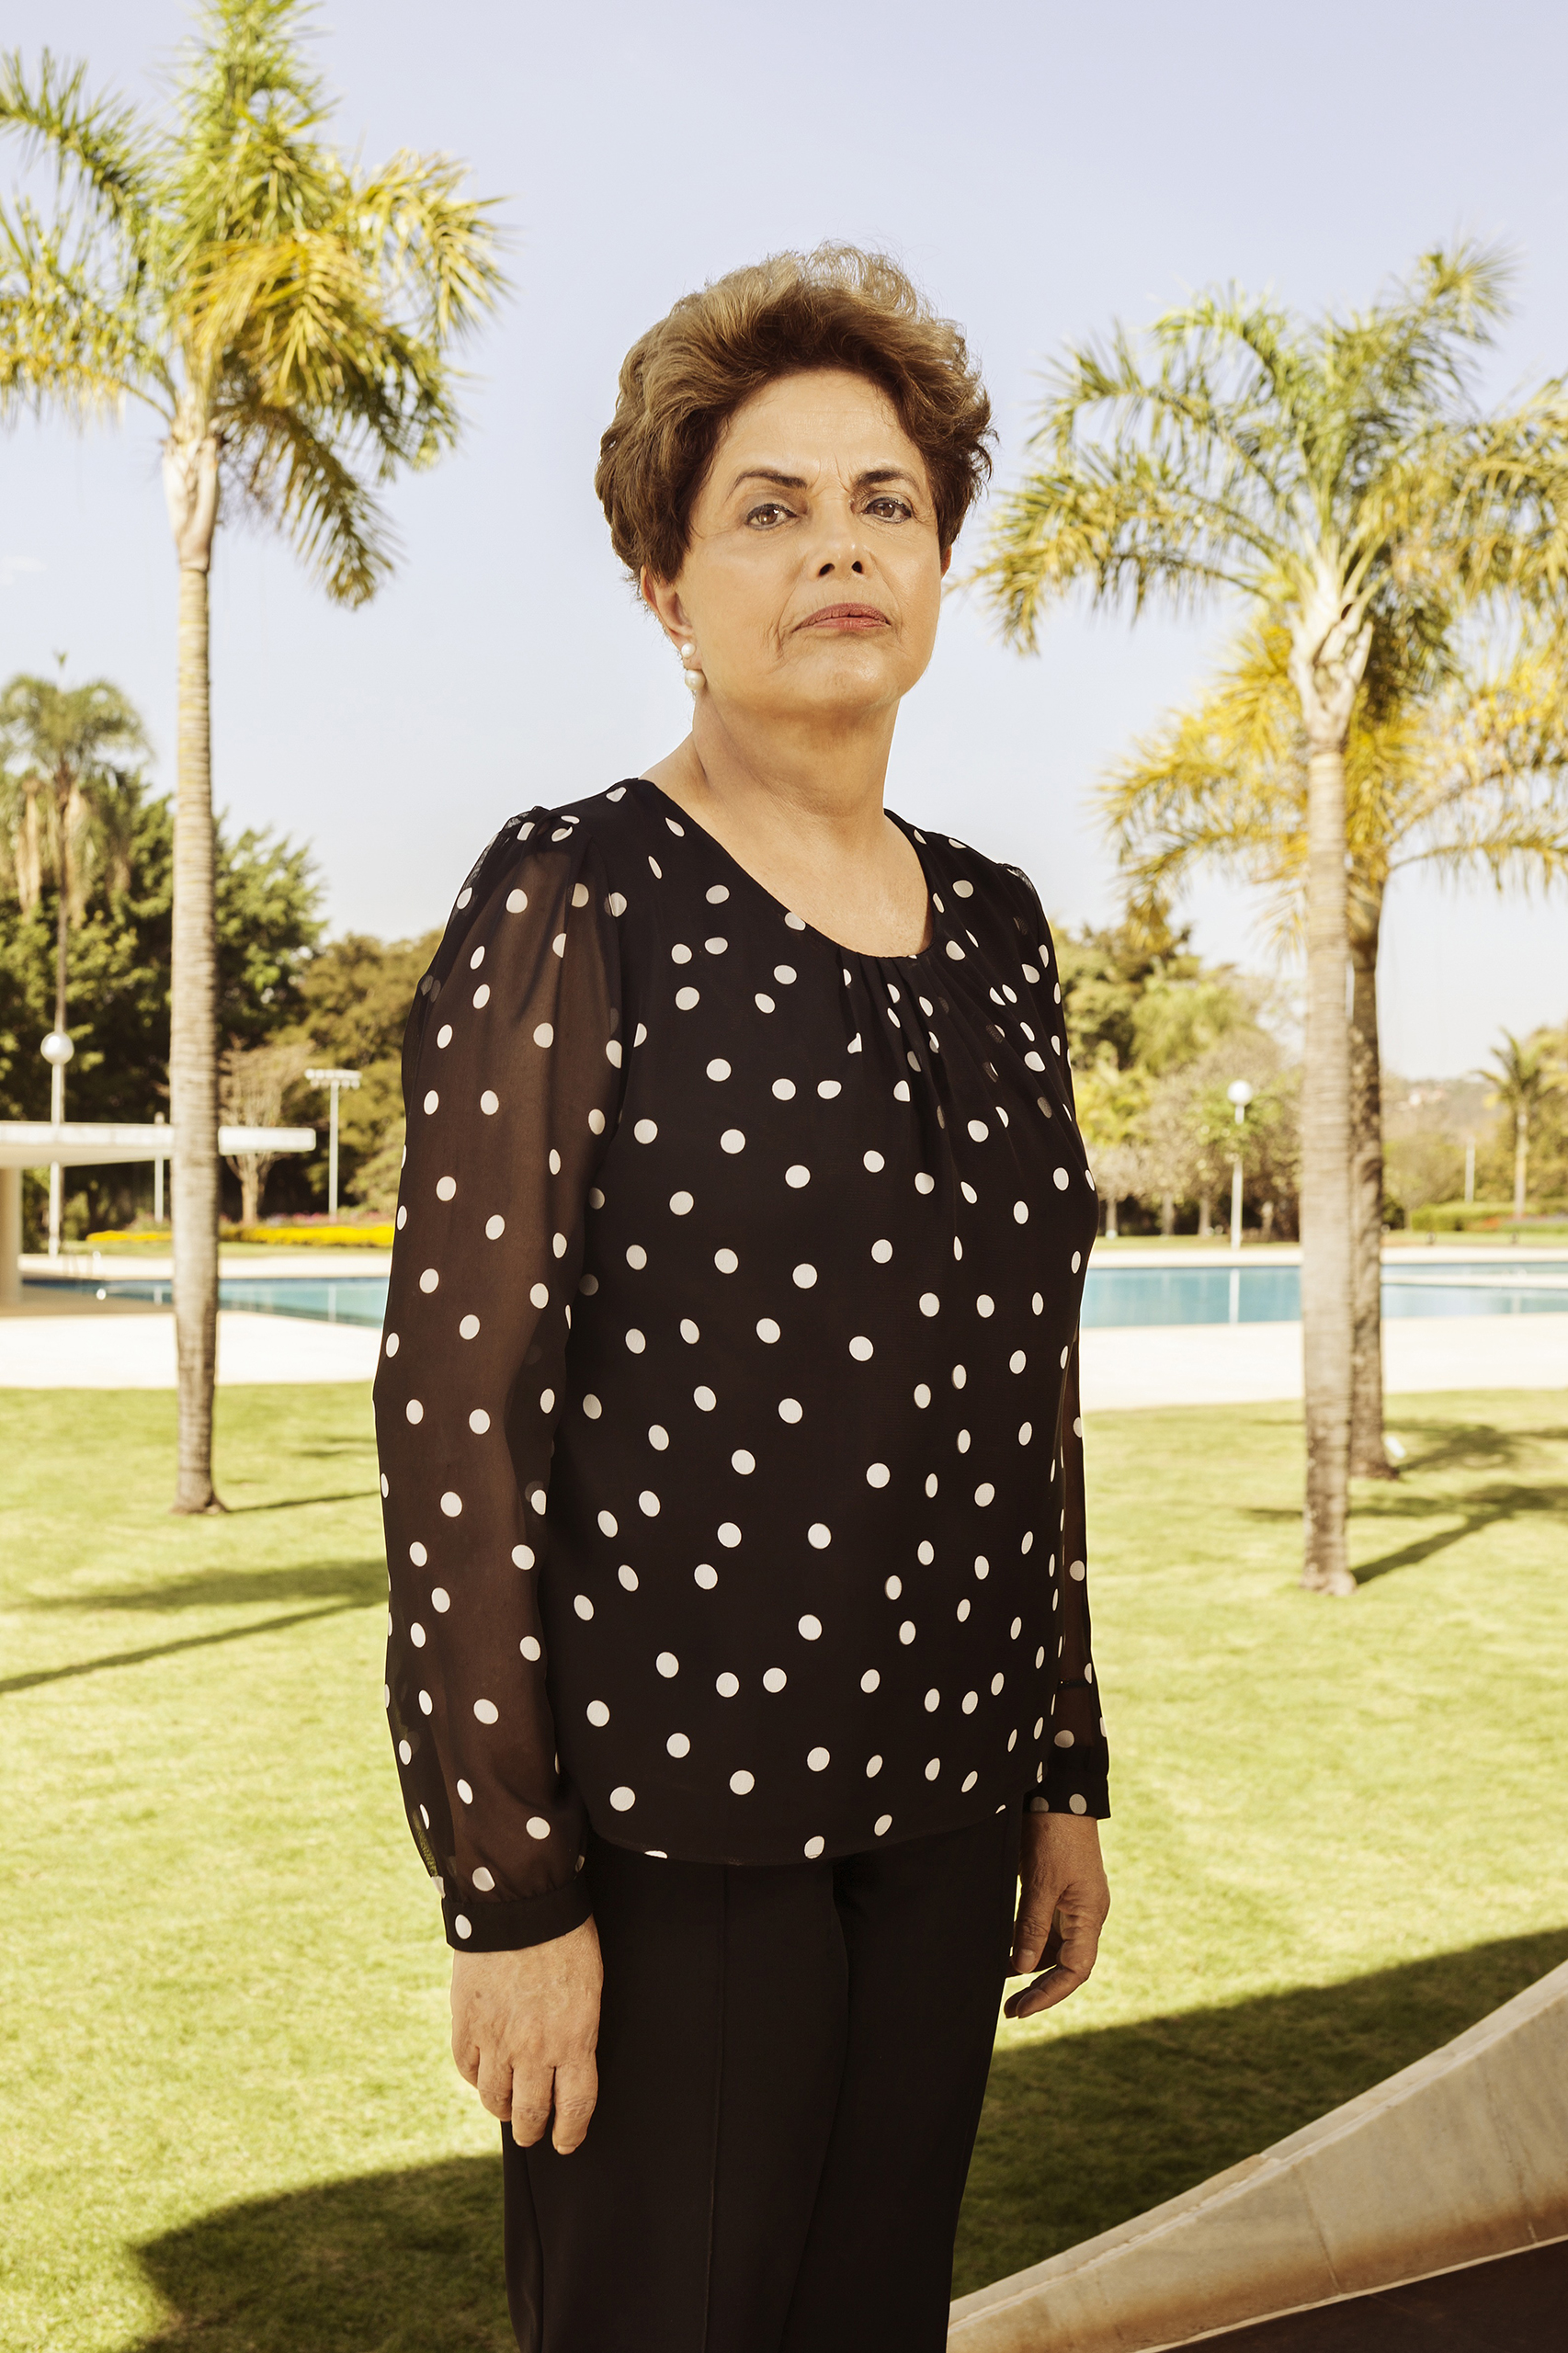 Suspended Brazilian President Dilma Rousseff outside the Alvorada residential palace in Brasilia on July 22, 2016.